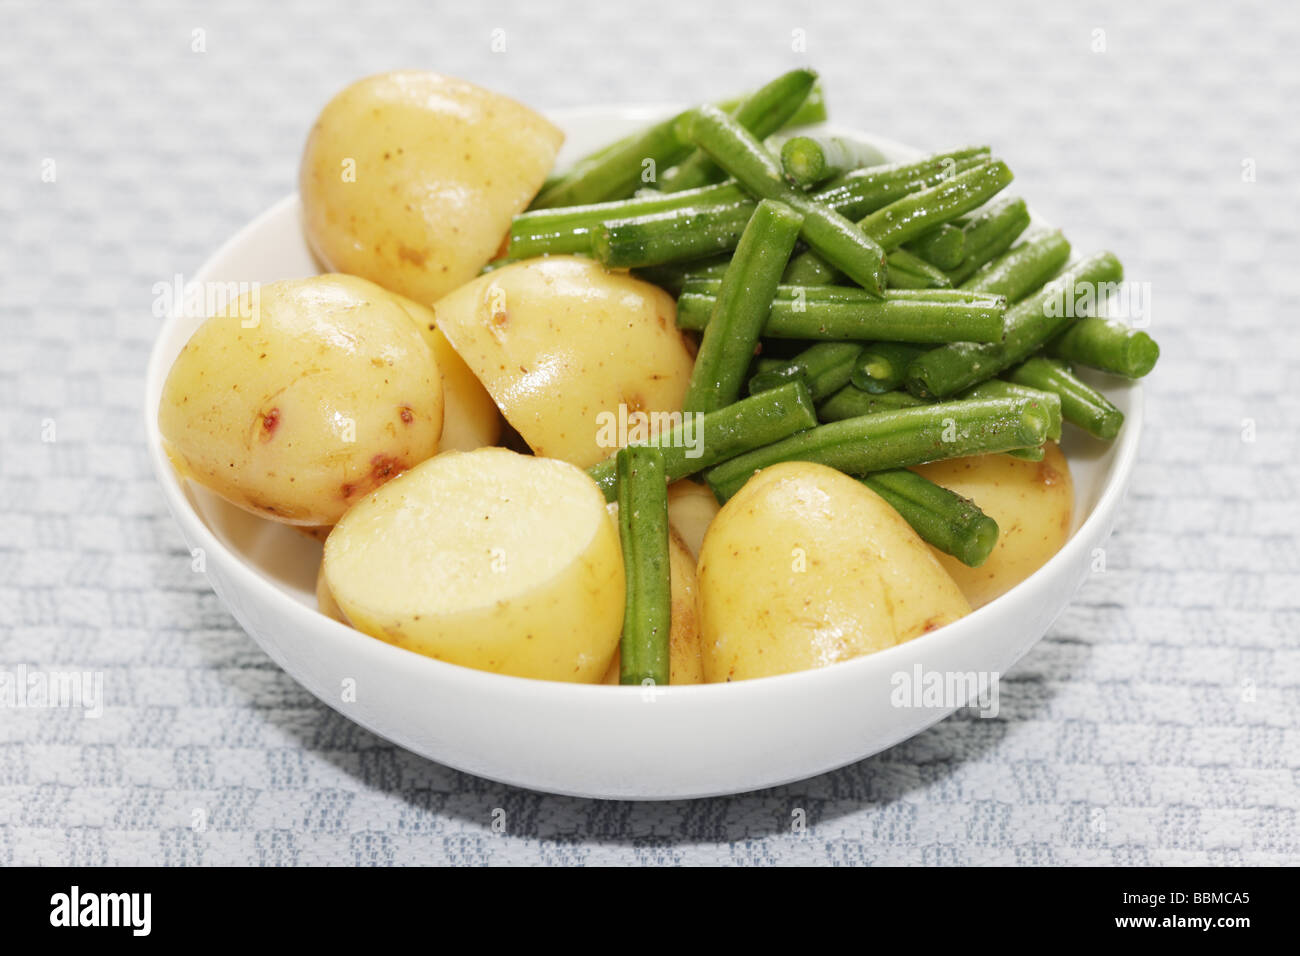 Bowl of Boiled Potatoes and Green Beans Stock Photo